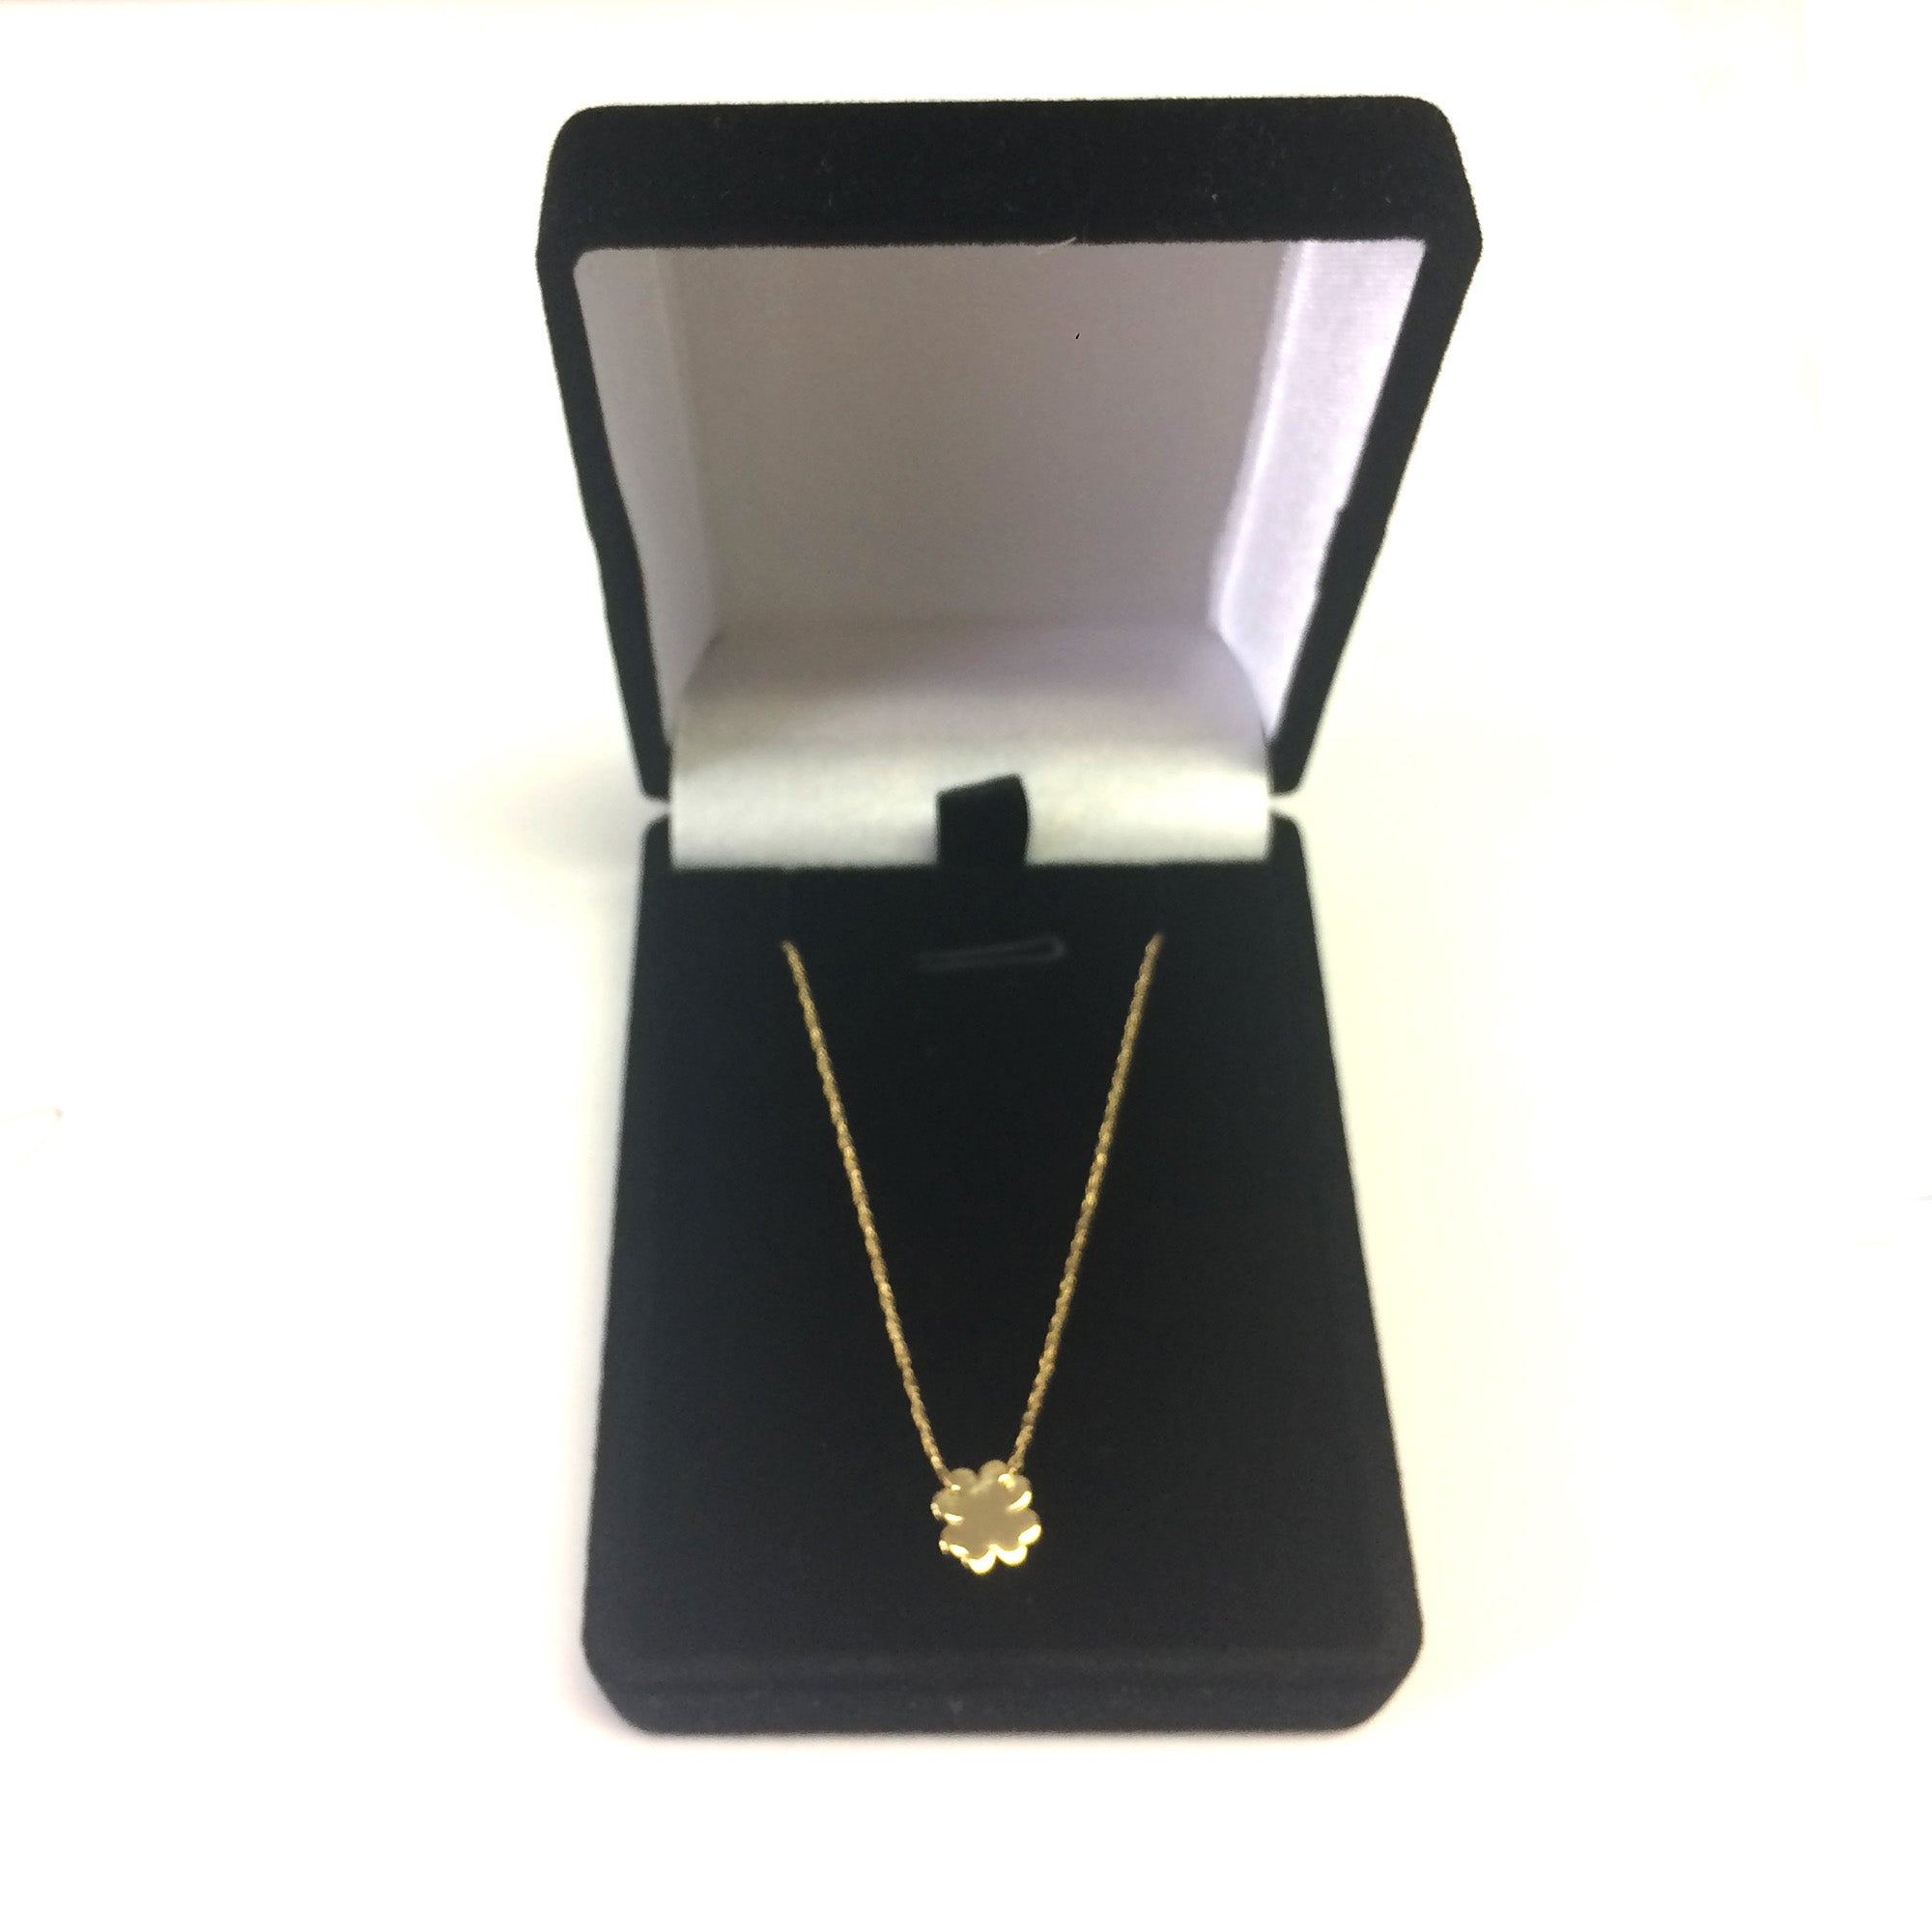 14K Yellow Gold Mini Clover Pendant Necklace, 16" To 18" Adjustable